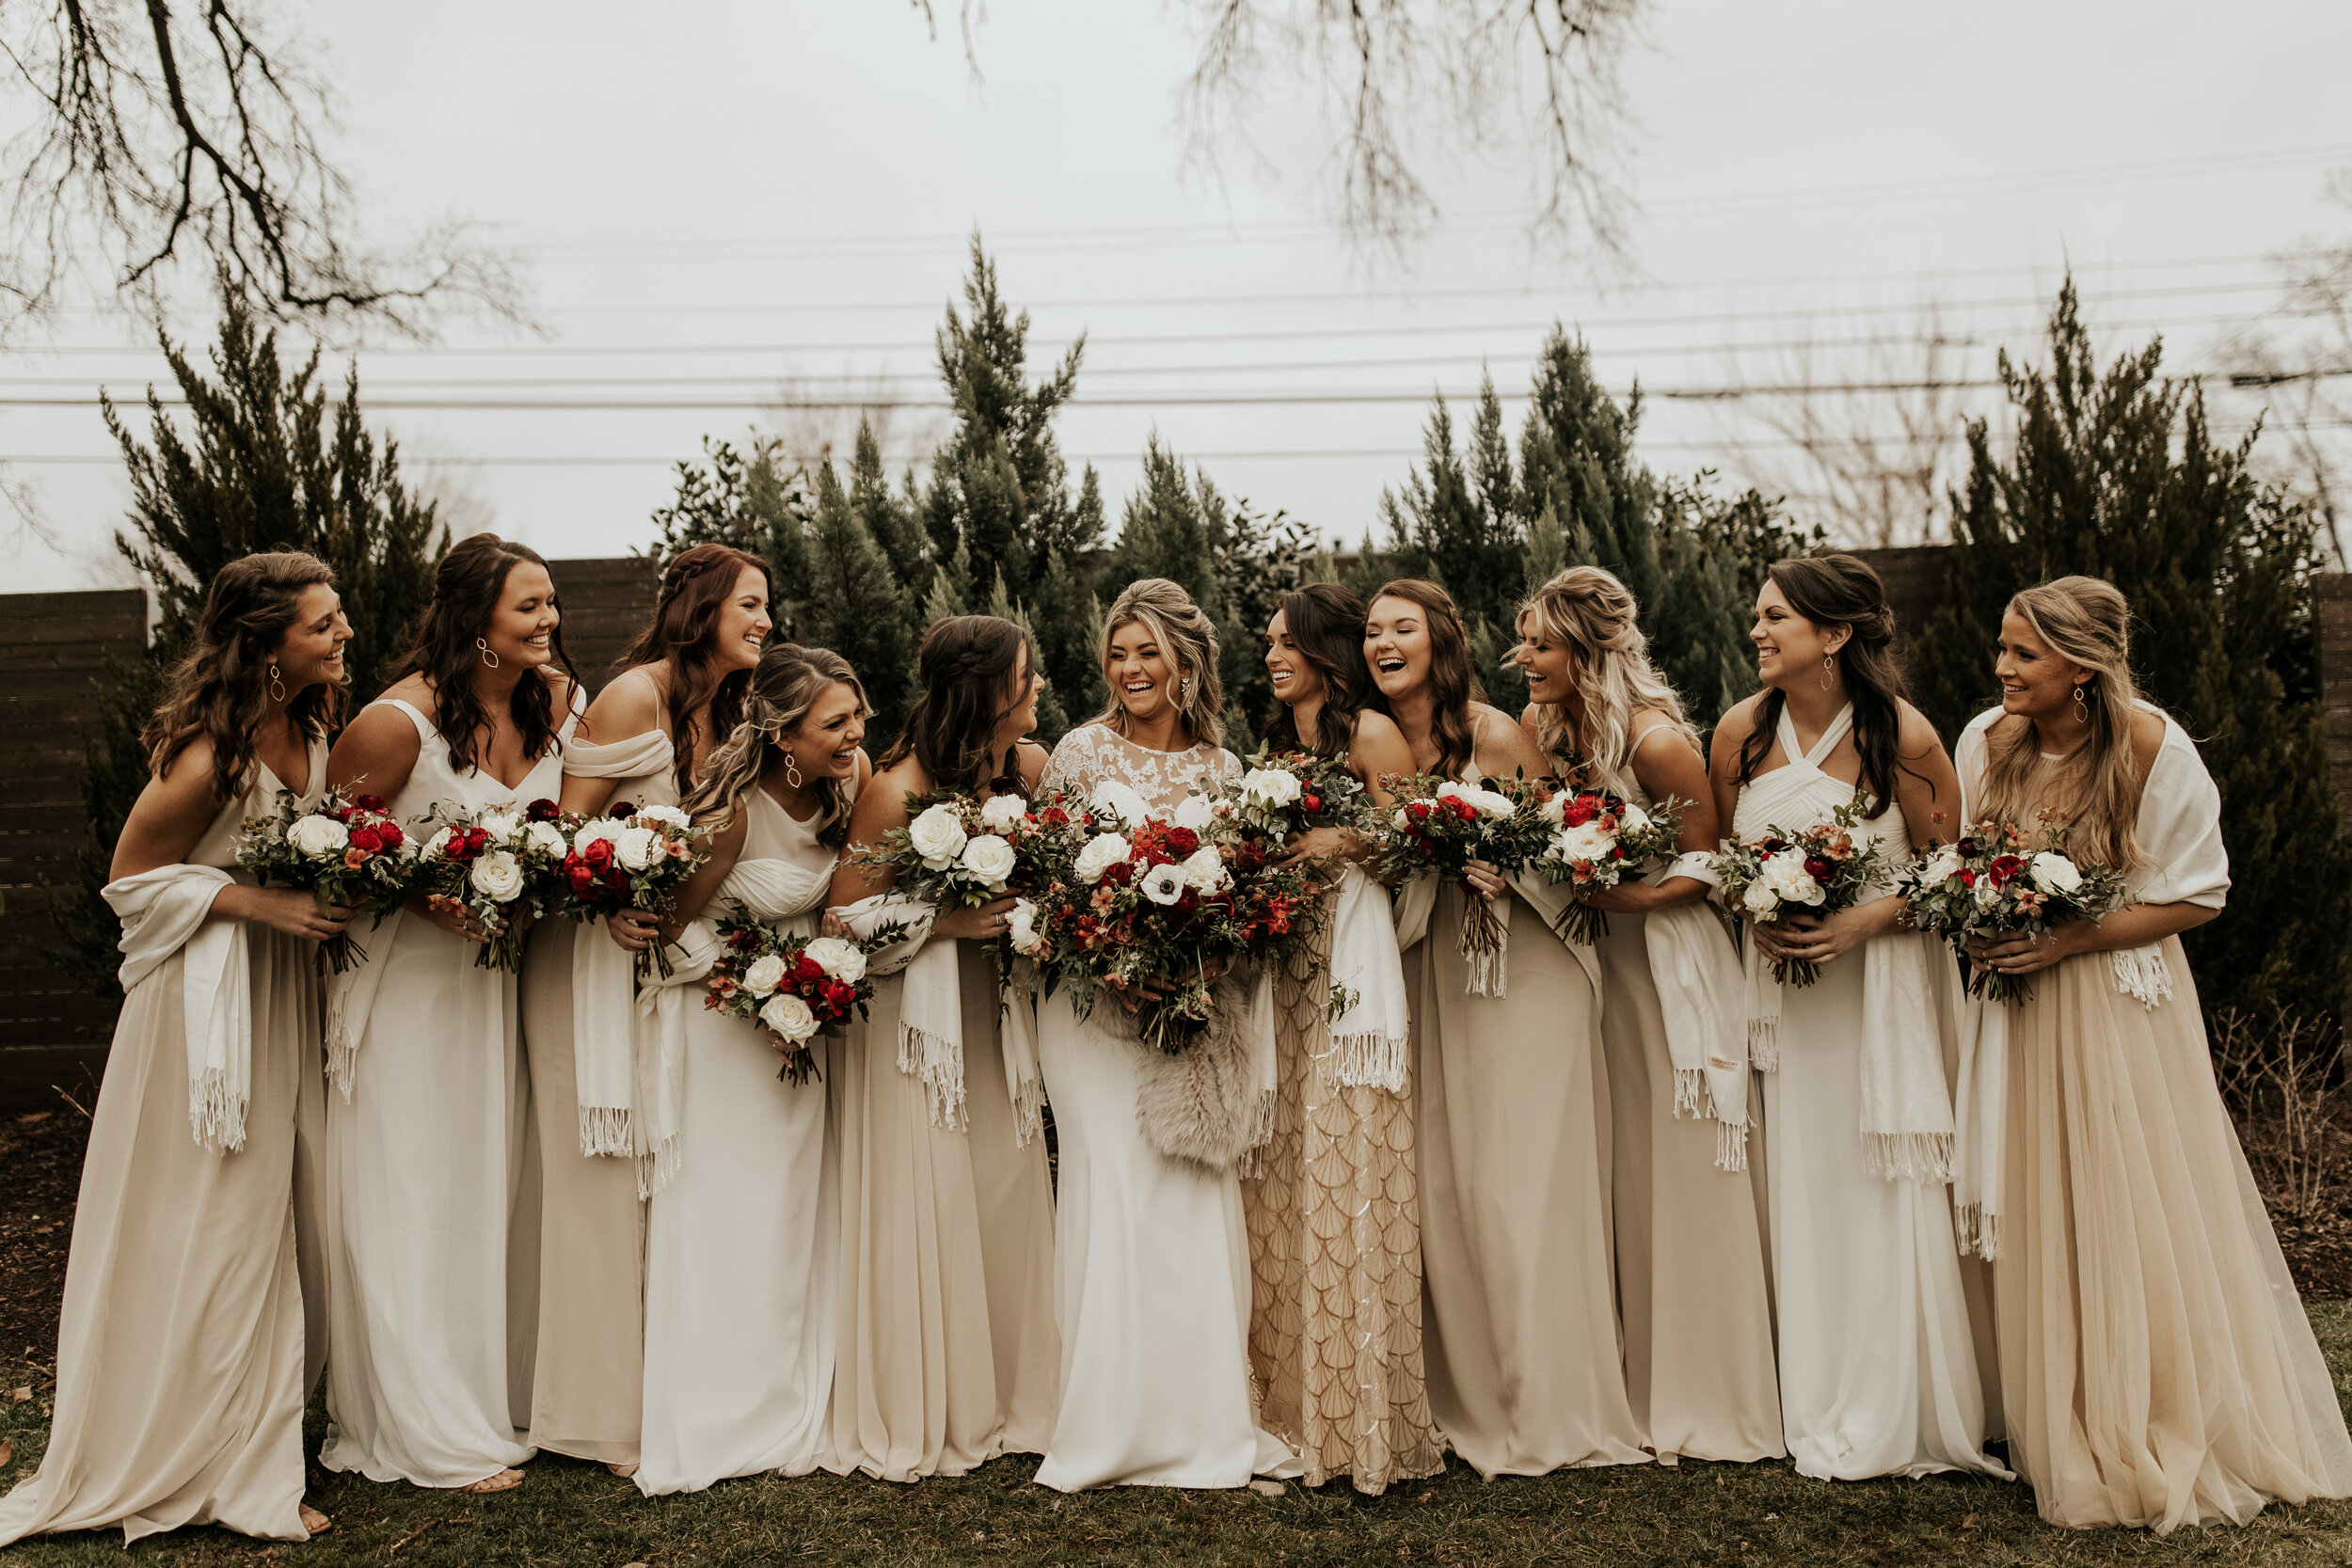 Neutral bridesmaid dresses with burgundy, white, and greenery bouquets of garden roses, peonies, and ranunculus for a wintry wedding at the Cordelle in Nashville.